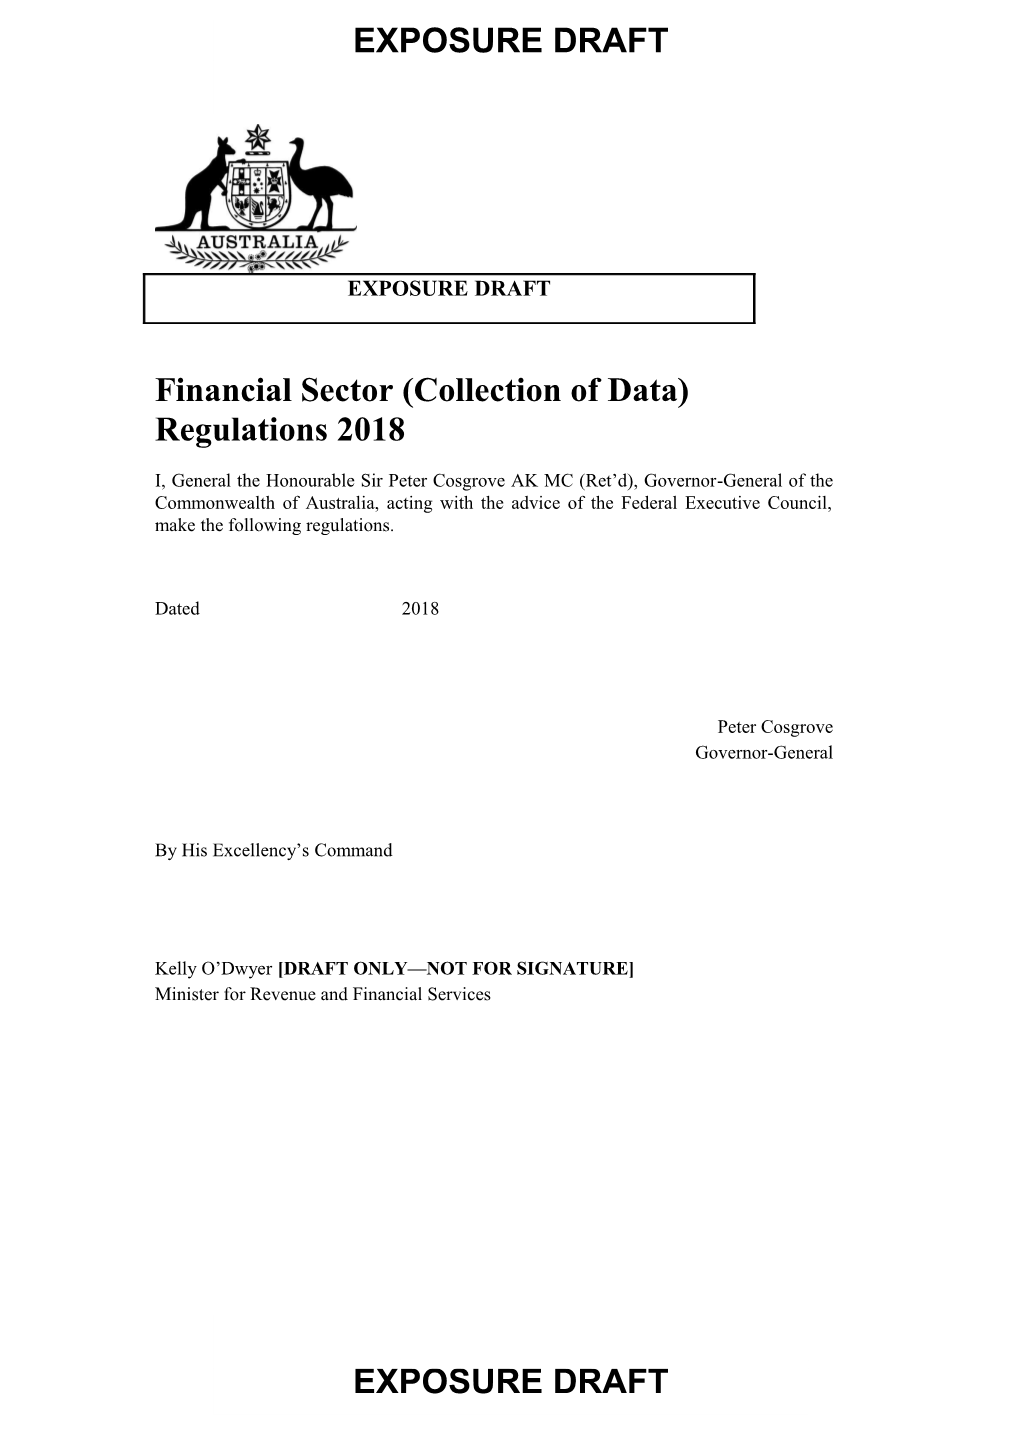 Exposure Draft: Financial Sector (Collection of Data) Regulations 2018